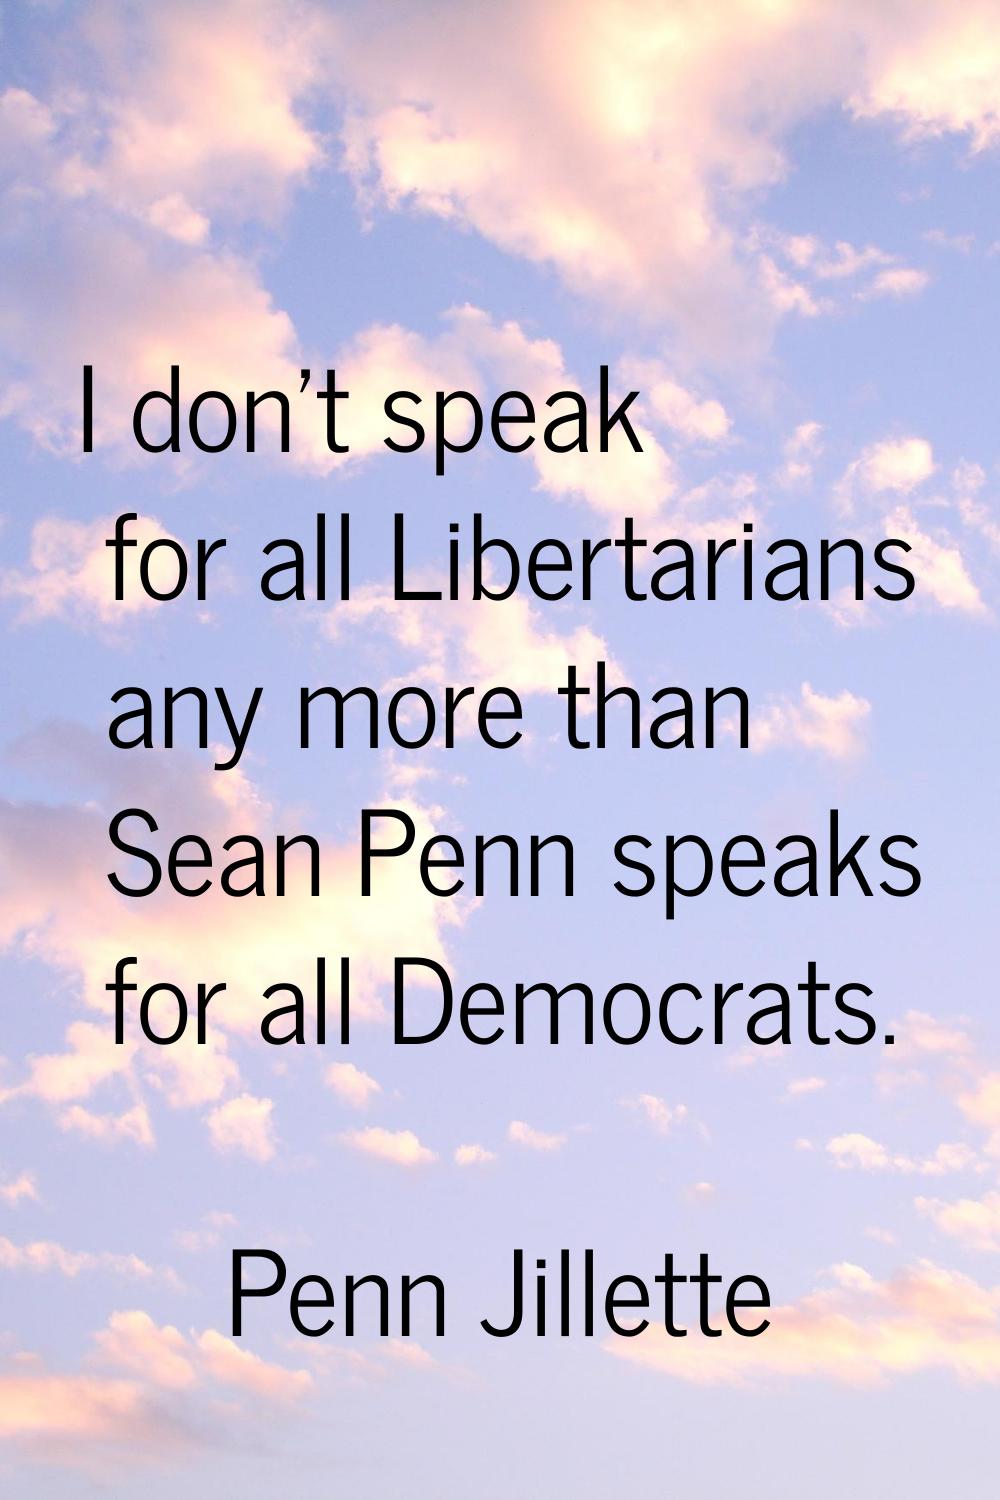 I don't speak for all Libertarians any more than Sean Penn speaks for all Democrats.